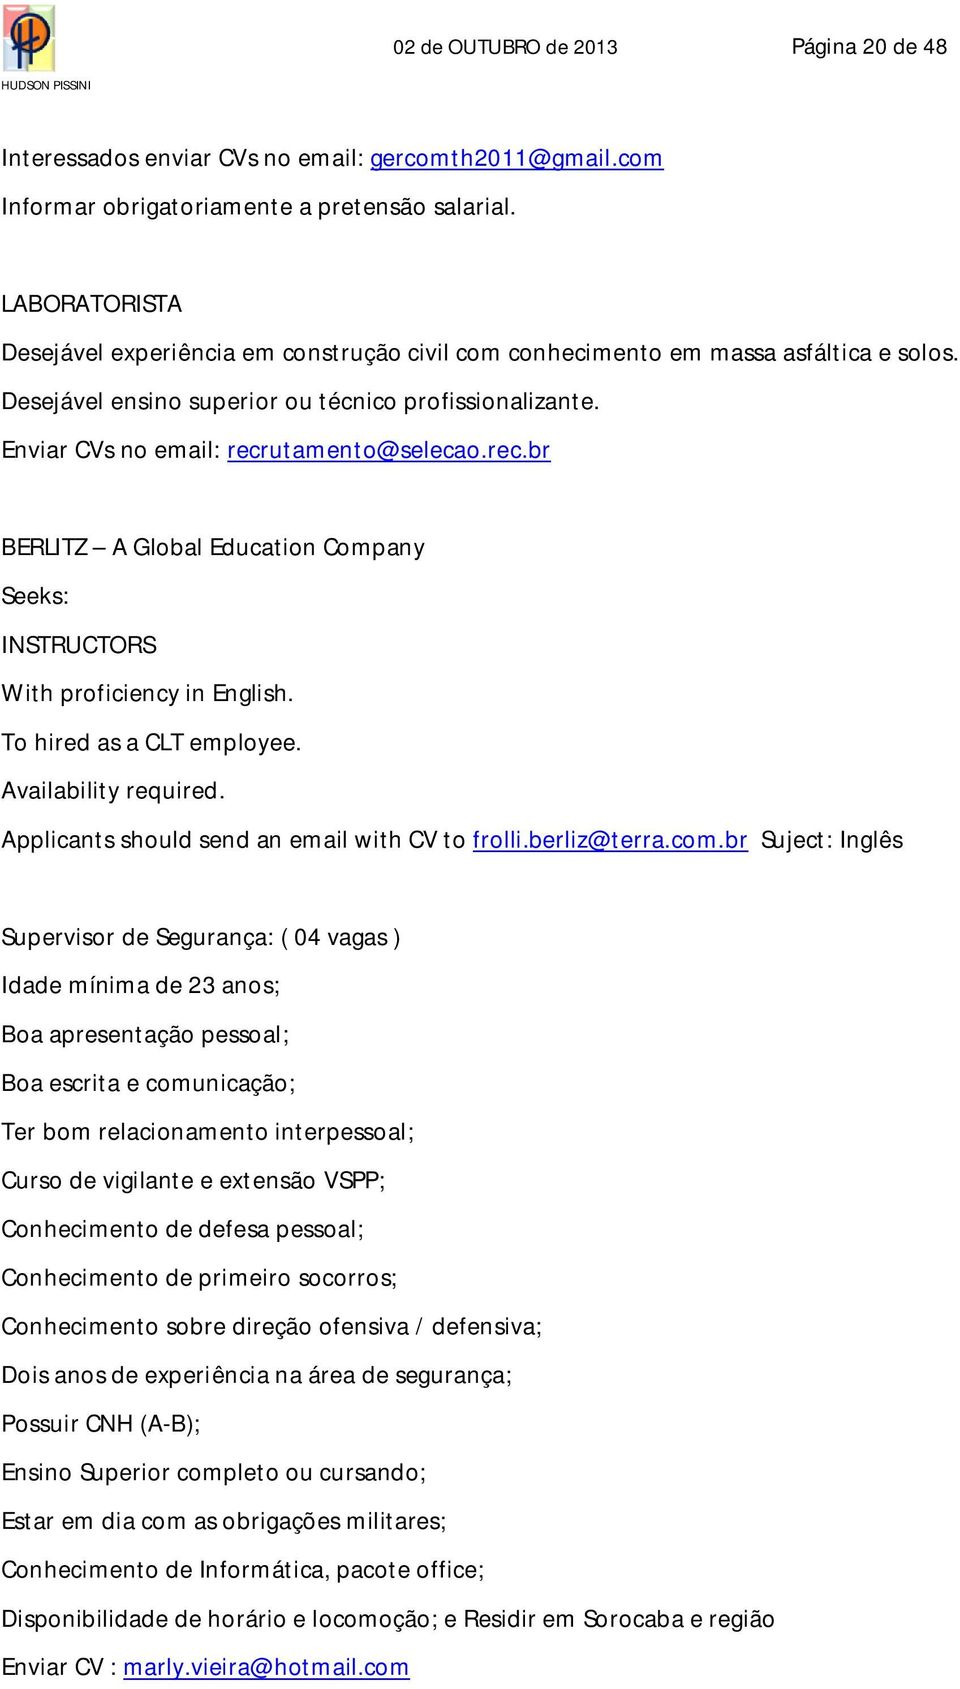 rec.br BERLITZ A Global Education Company Seeks: INSTRUCTORS With proficiency in English. To hired as a CLT employee. Availability required. Applicants should send an email with CV to frolli.